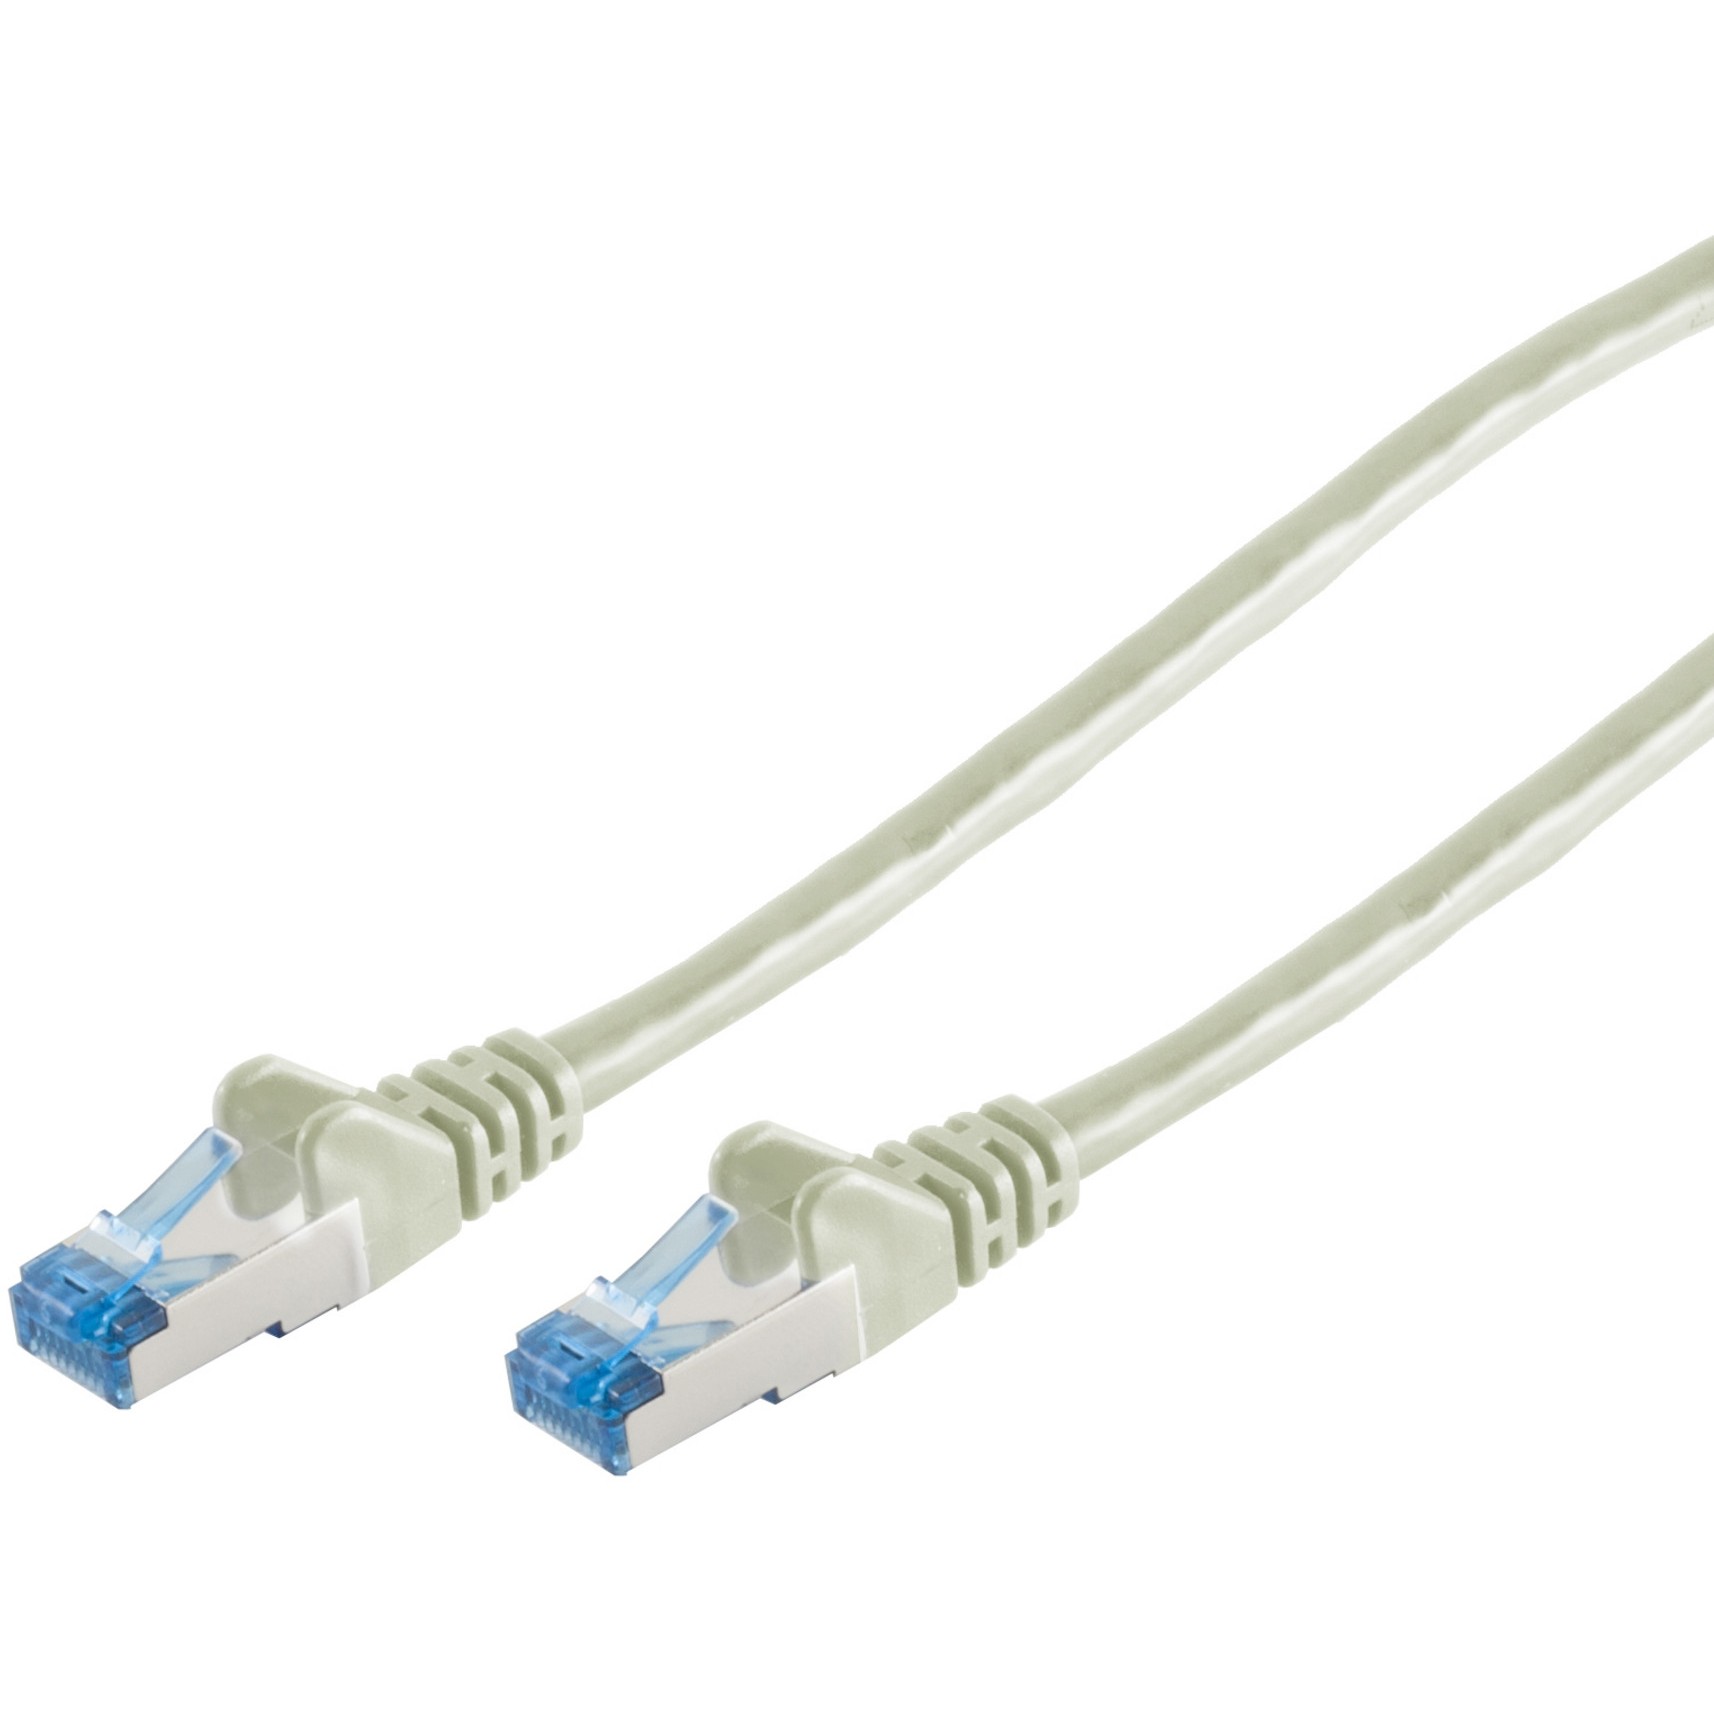 S-Conn 75720 networking cable